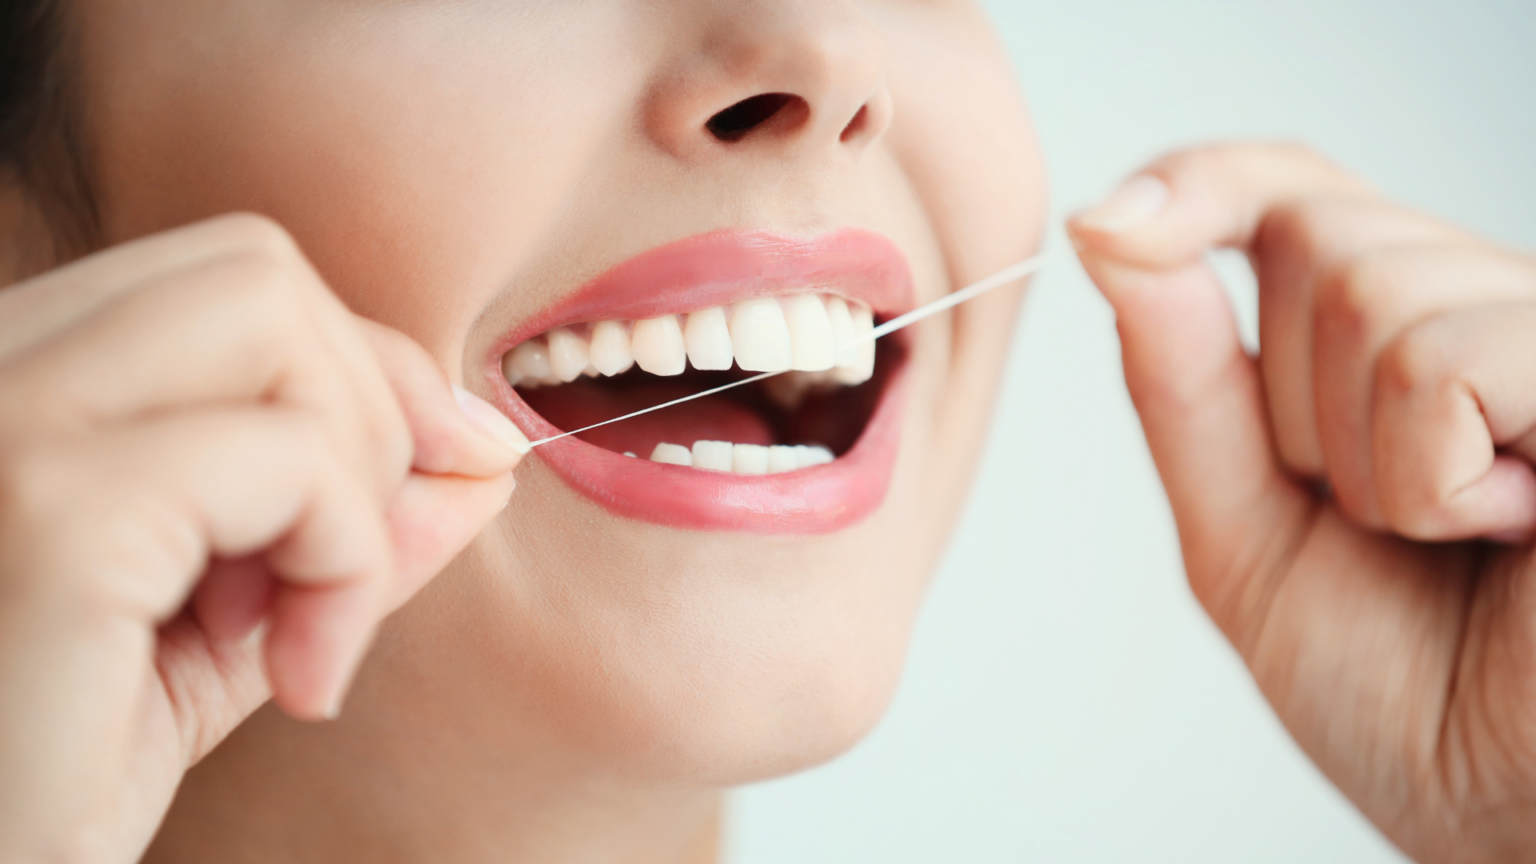 Professional Teeth Cleaning: Benefits You Can’t Get at Home